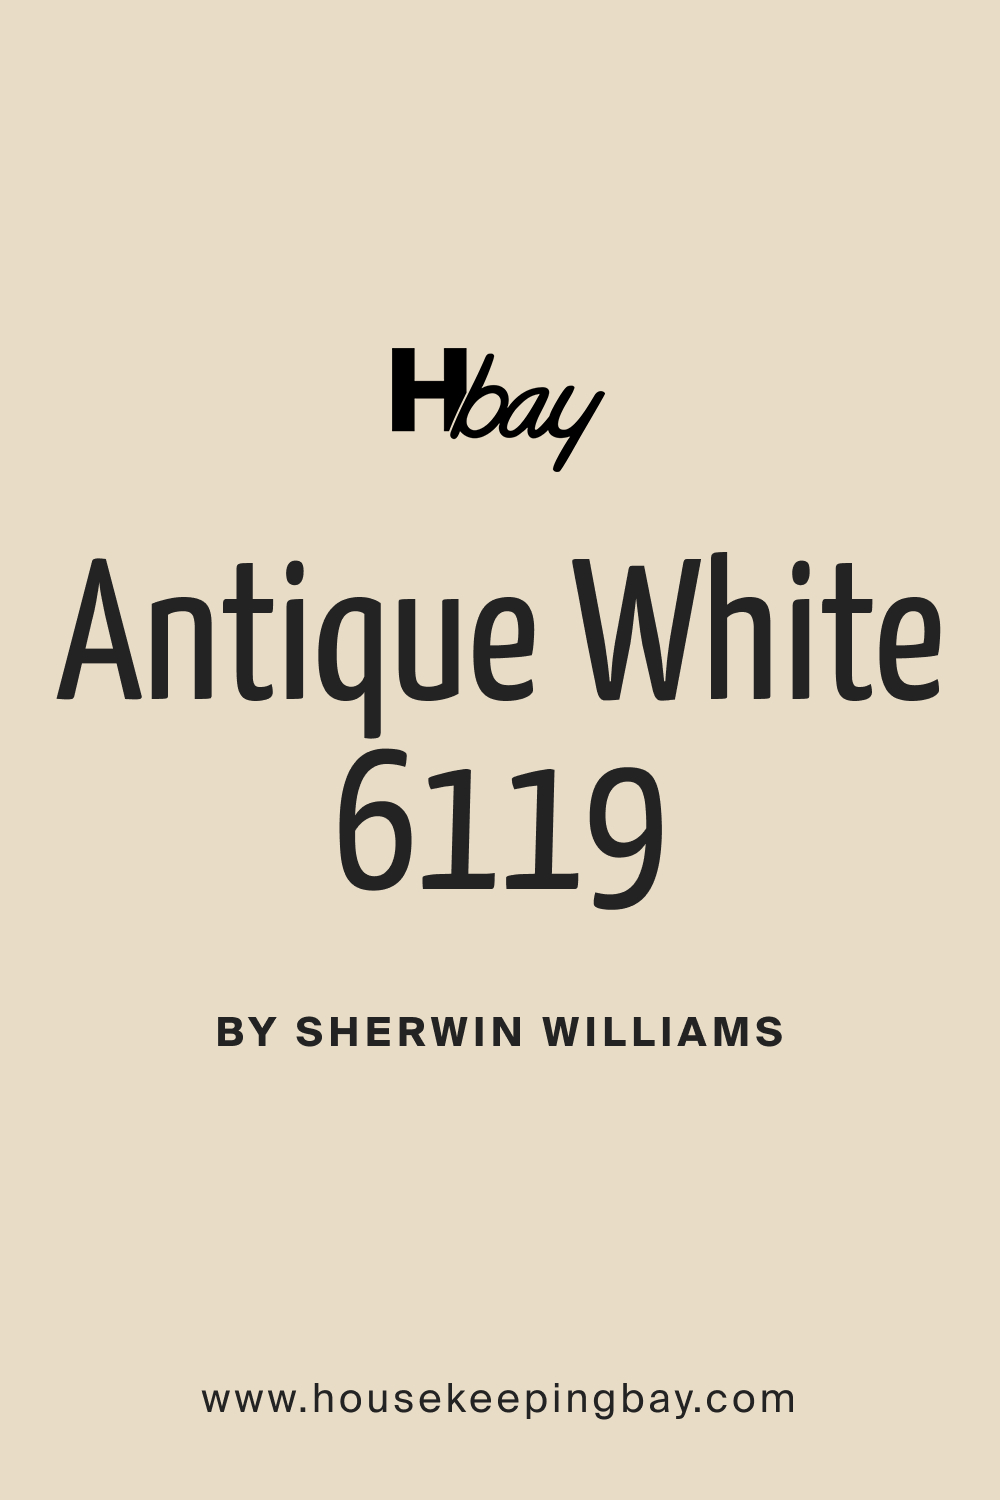 Antique White SW 6119 Paint Color by Sherwin Williams